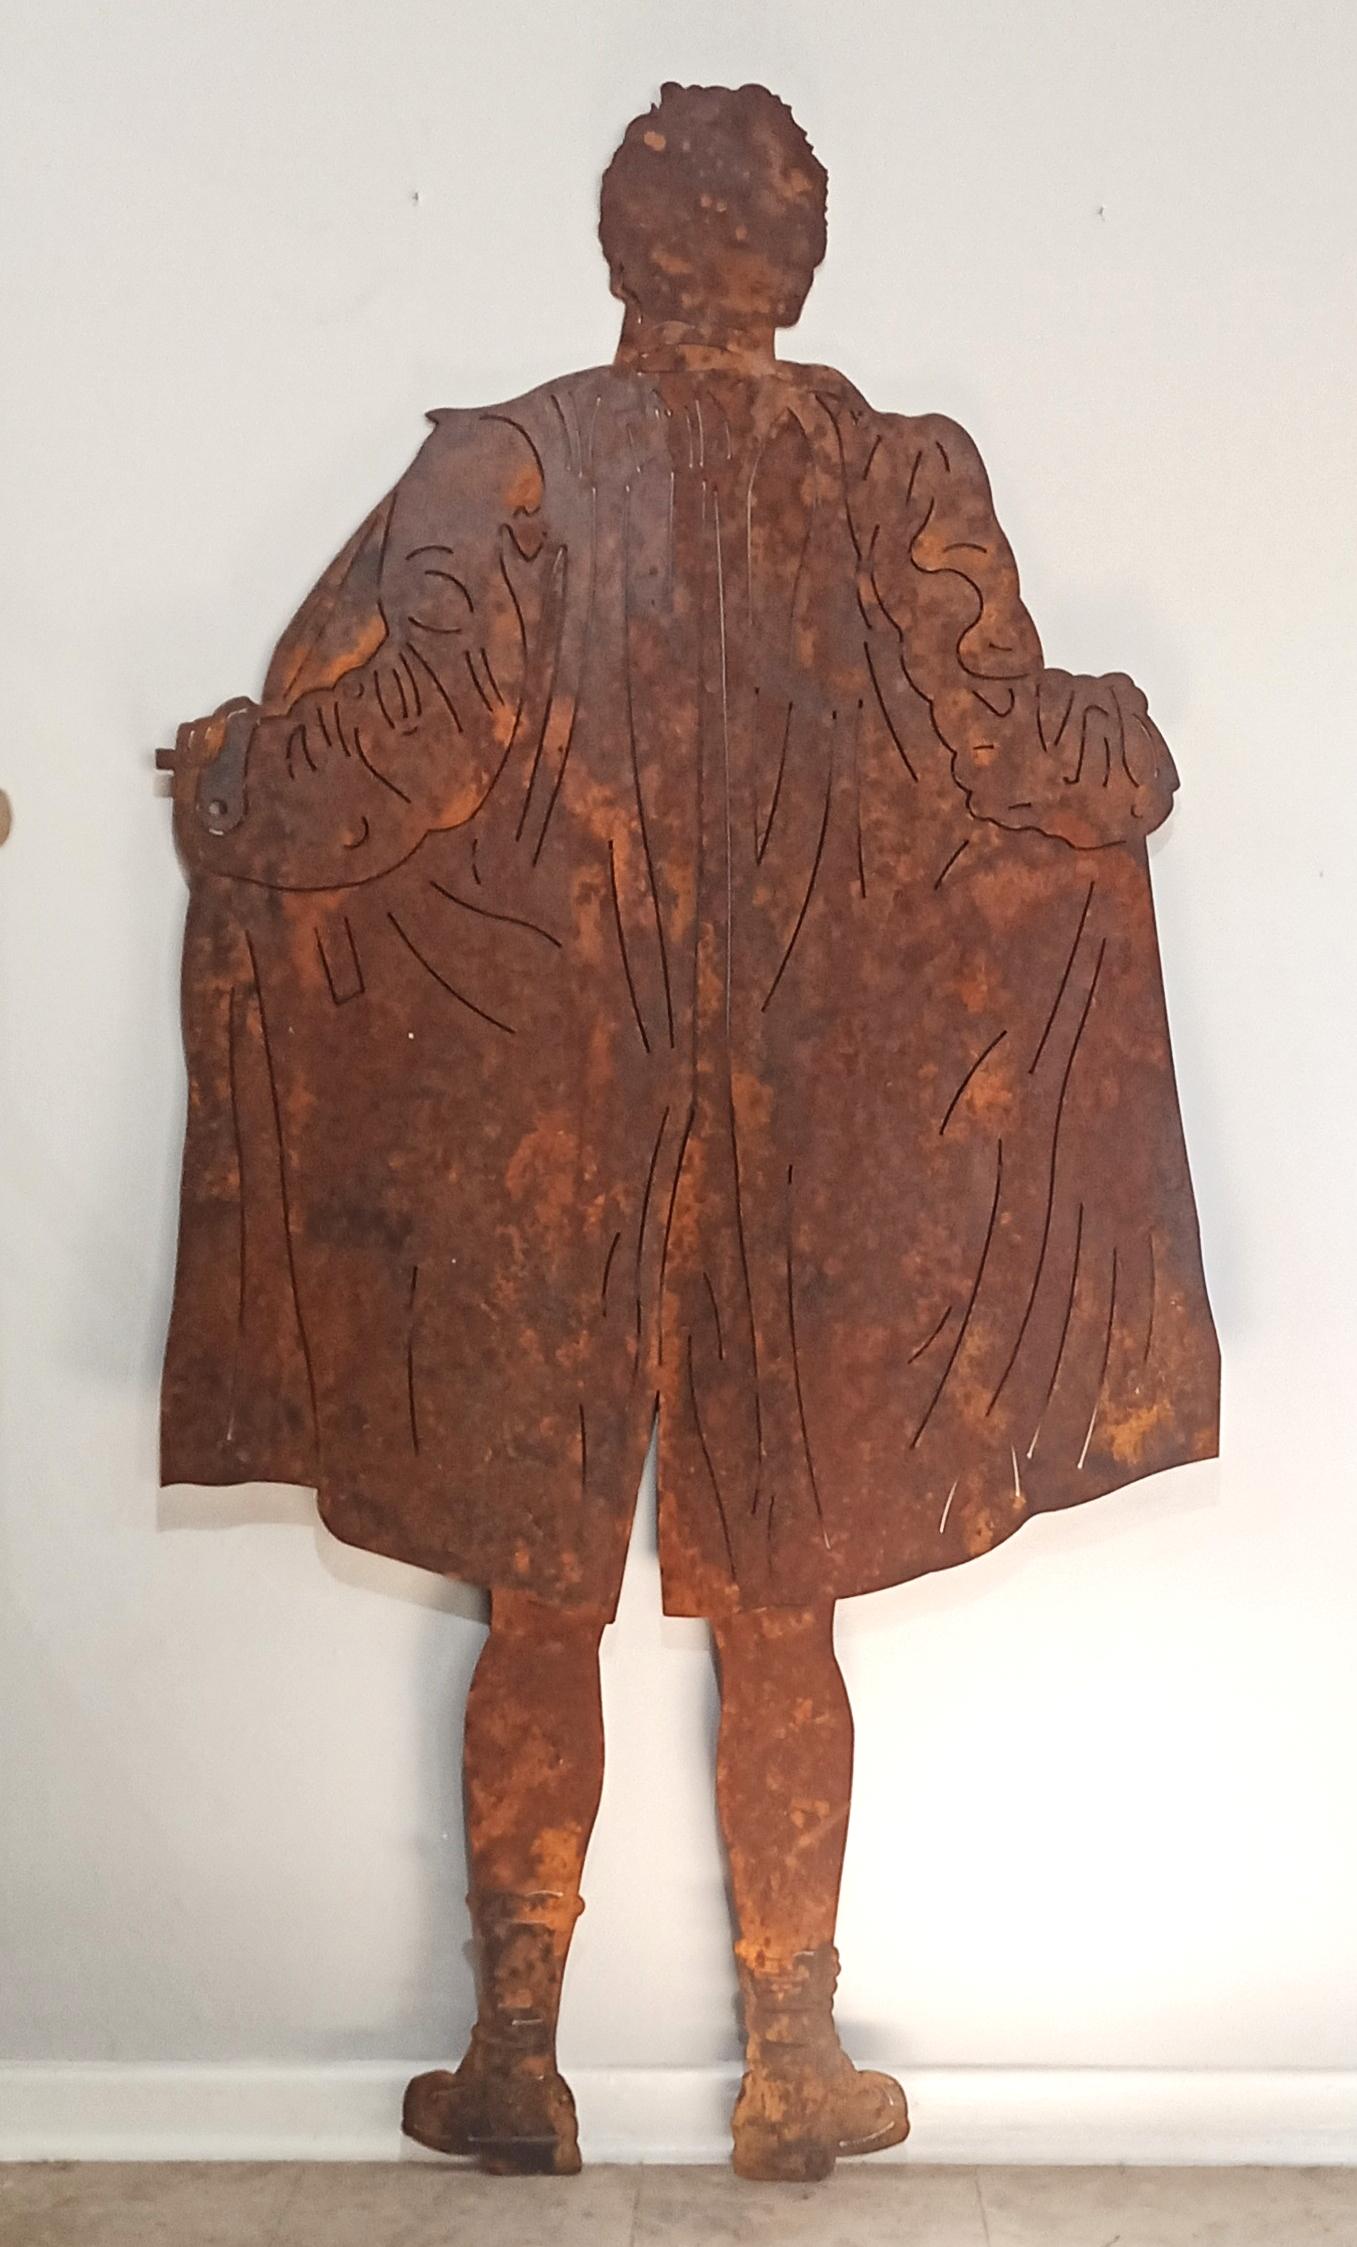 Uwe Pfaff Figurative Sculpture - Large Limited Edition Rusted Steel Wall Mounted Sculpture "Flasher"